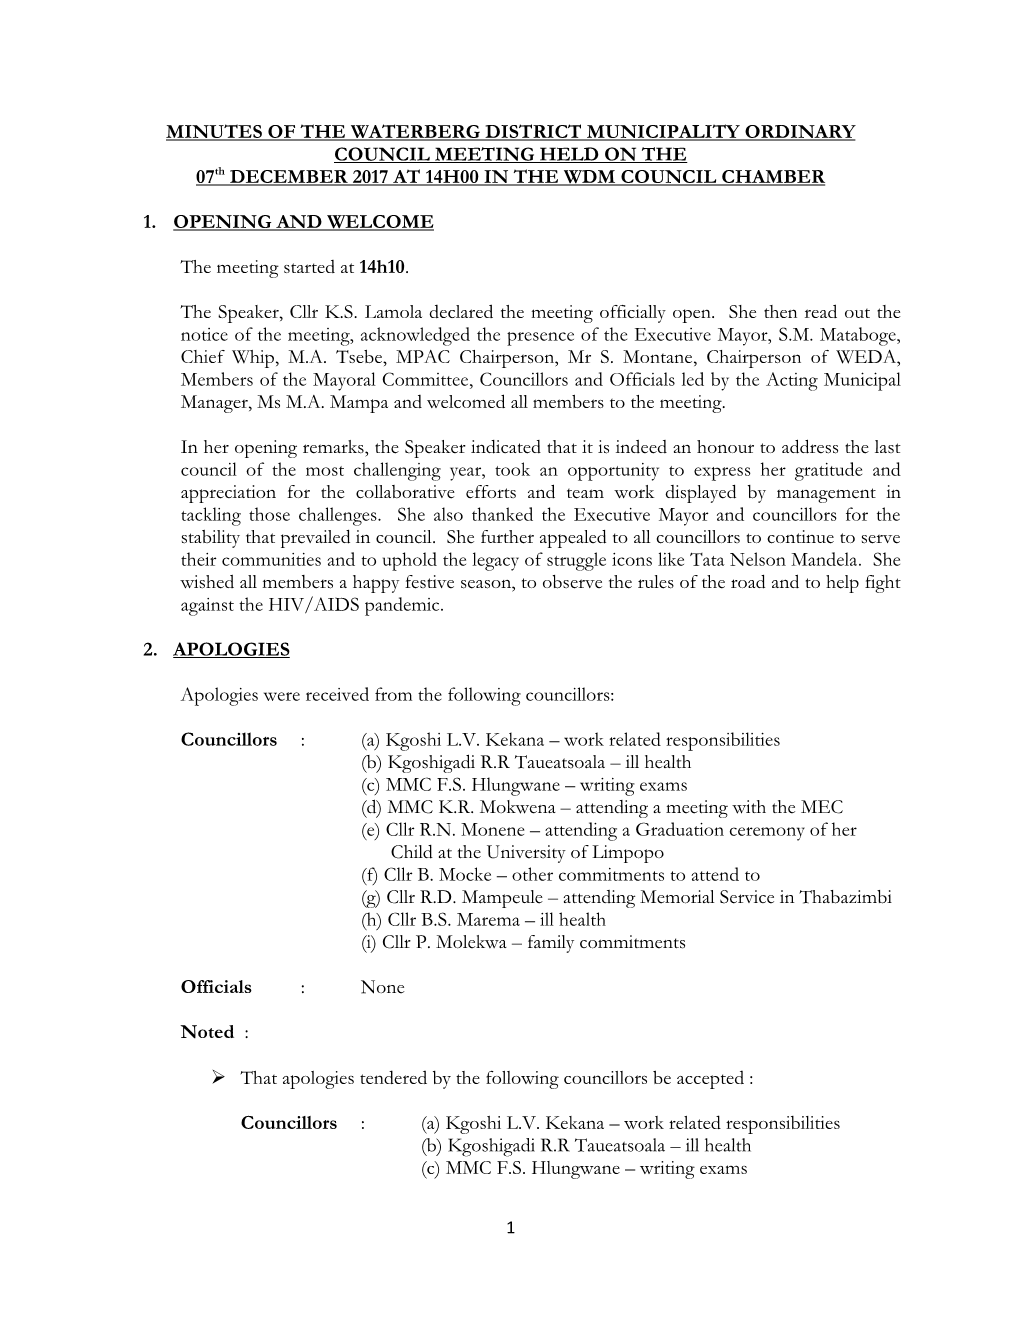 Minutes of Ordinary Council Meeting Dated 28 August 2015